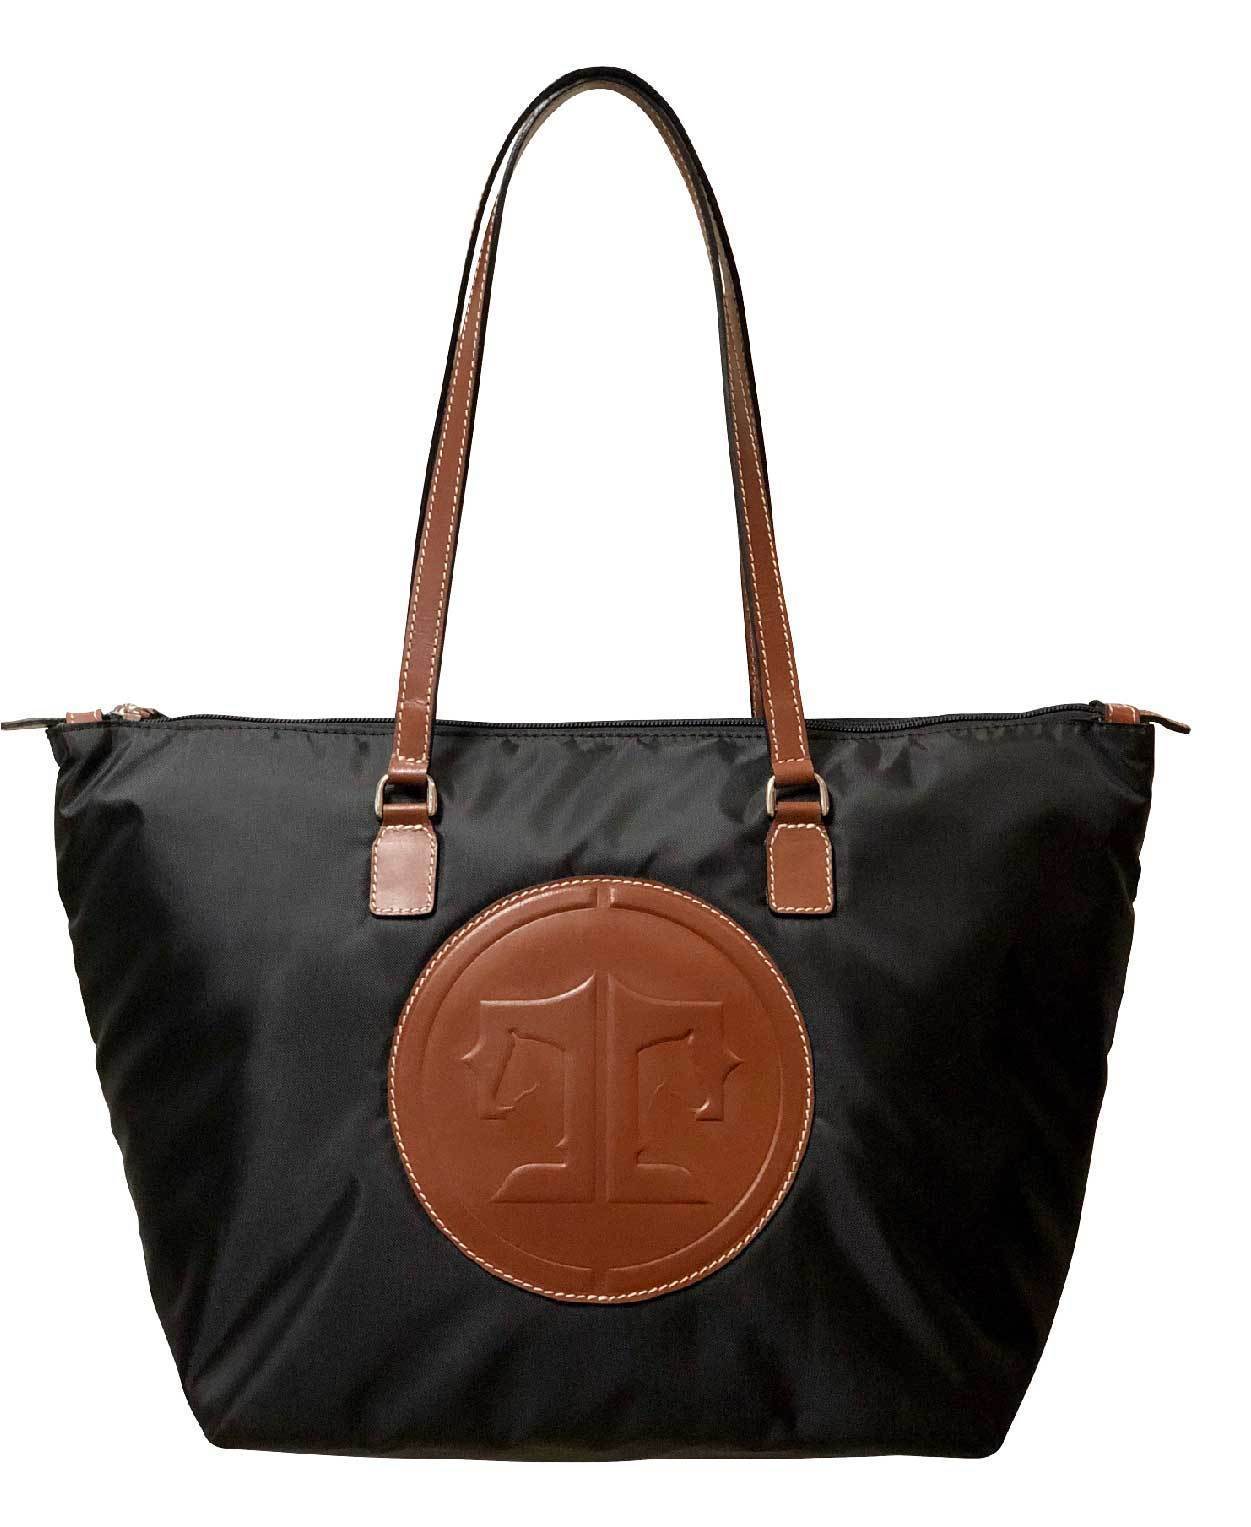 Tucker Tweed Devon Day Bag - Signature Collection - Equiluxe Tack